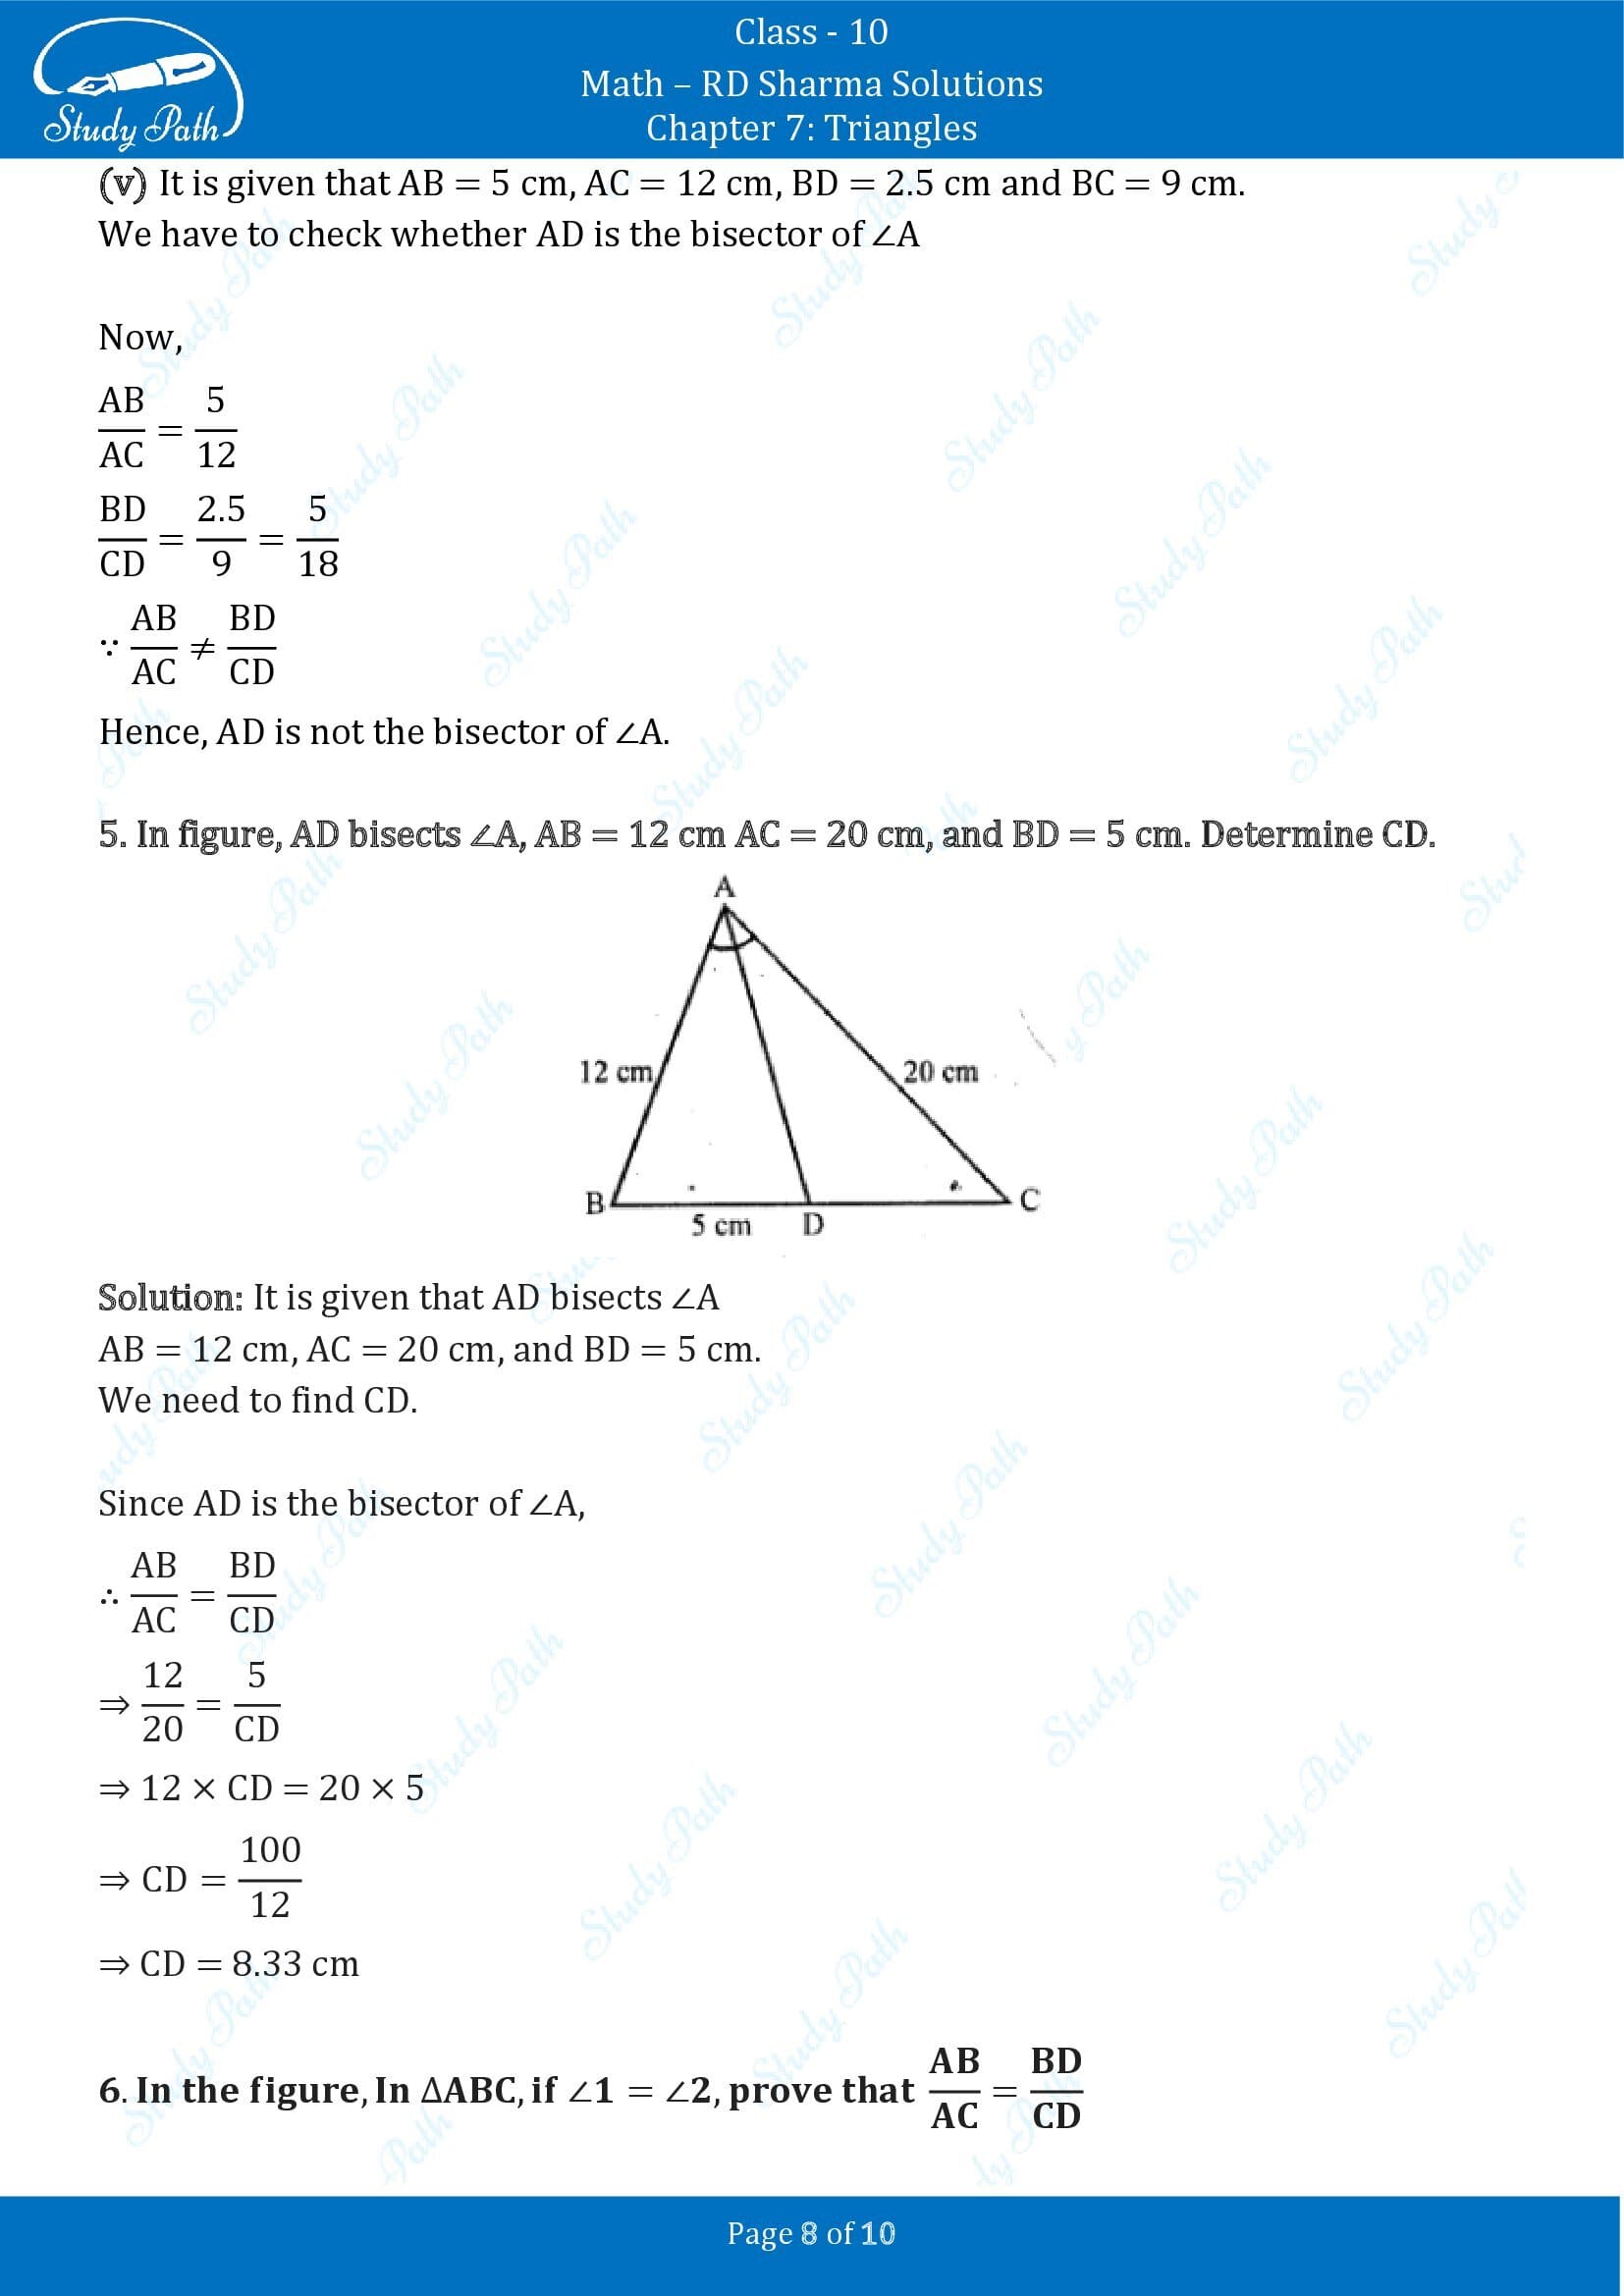 RD Sharma Solutions Class 10 Chapter 7 Triangles Exercise 7.3 00008